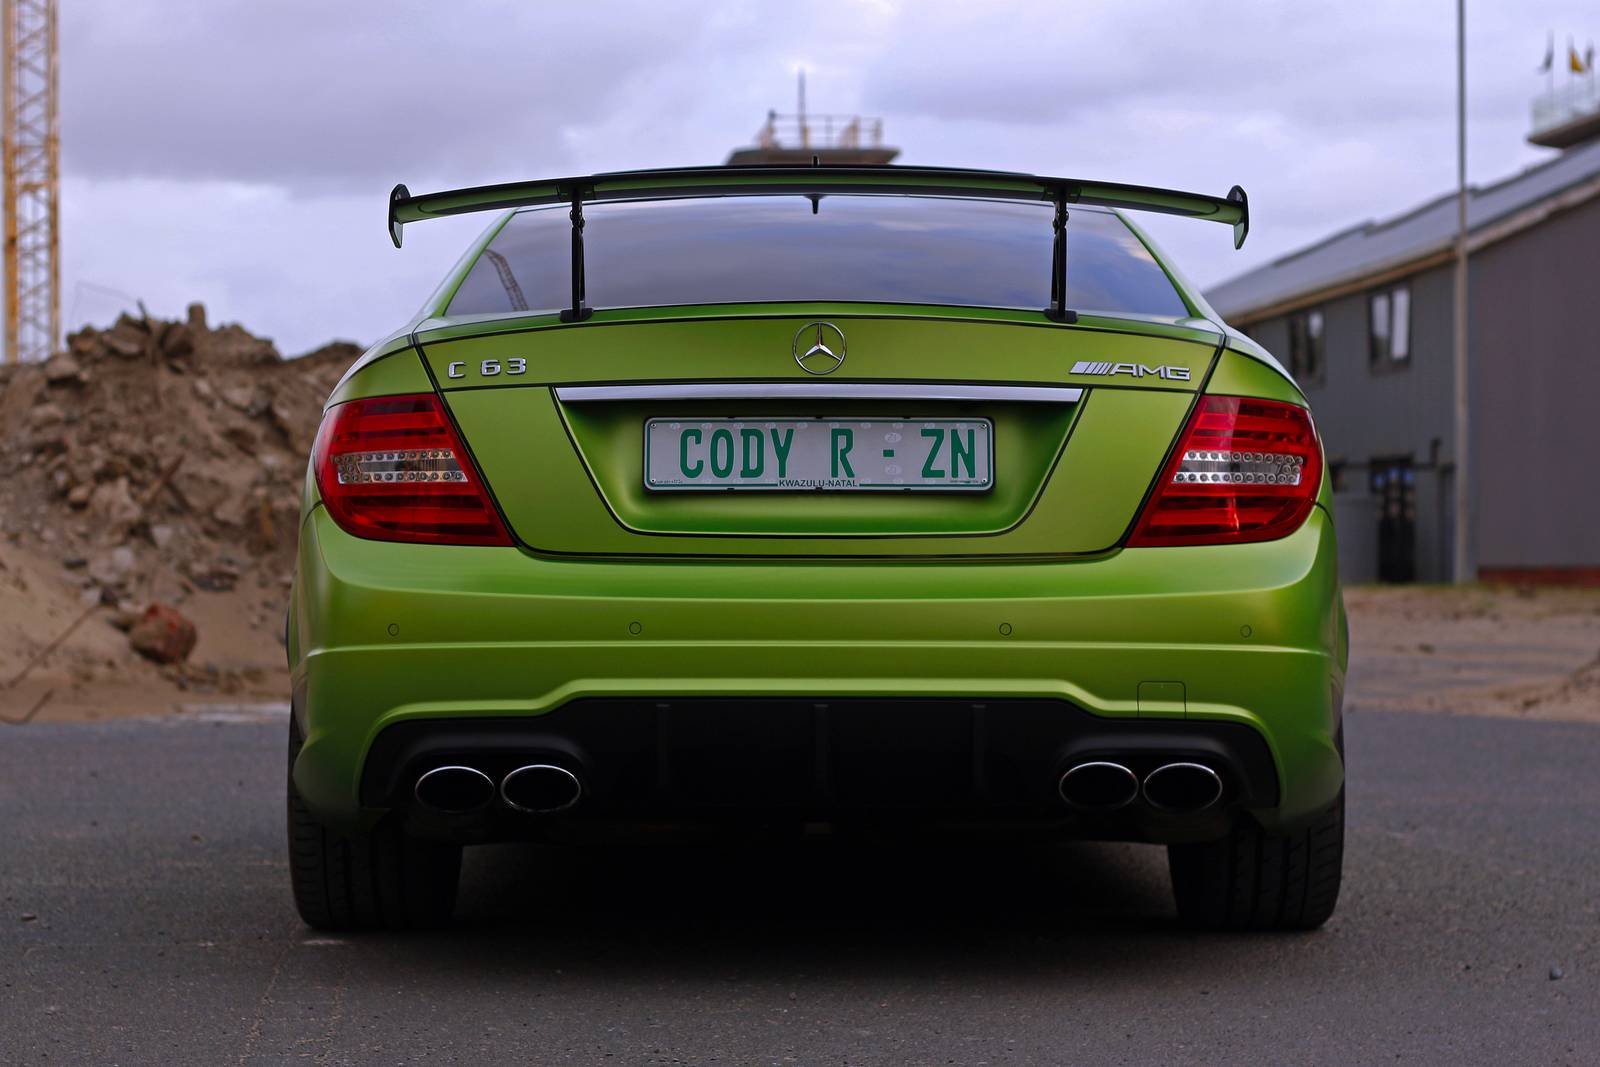 mercedes, Benz, C63, Green, Amg, Coupe, Legacy, Edition, Cars, 2016 Wallpaper